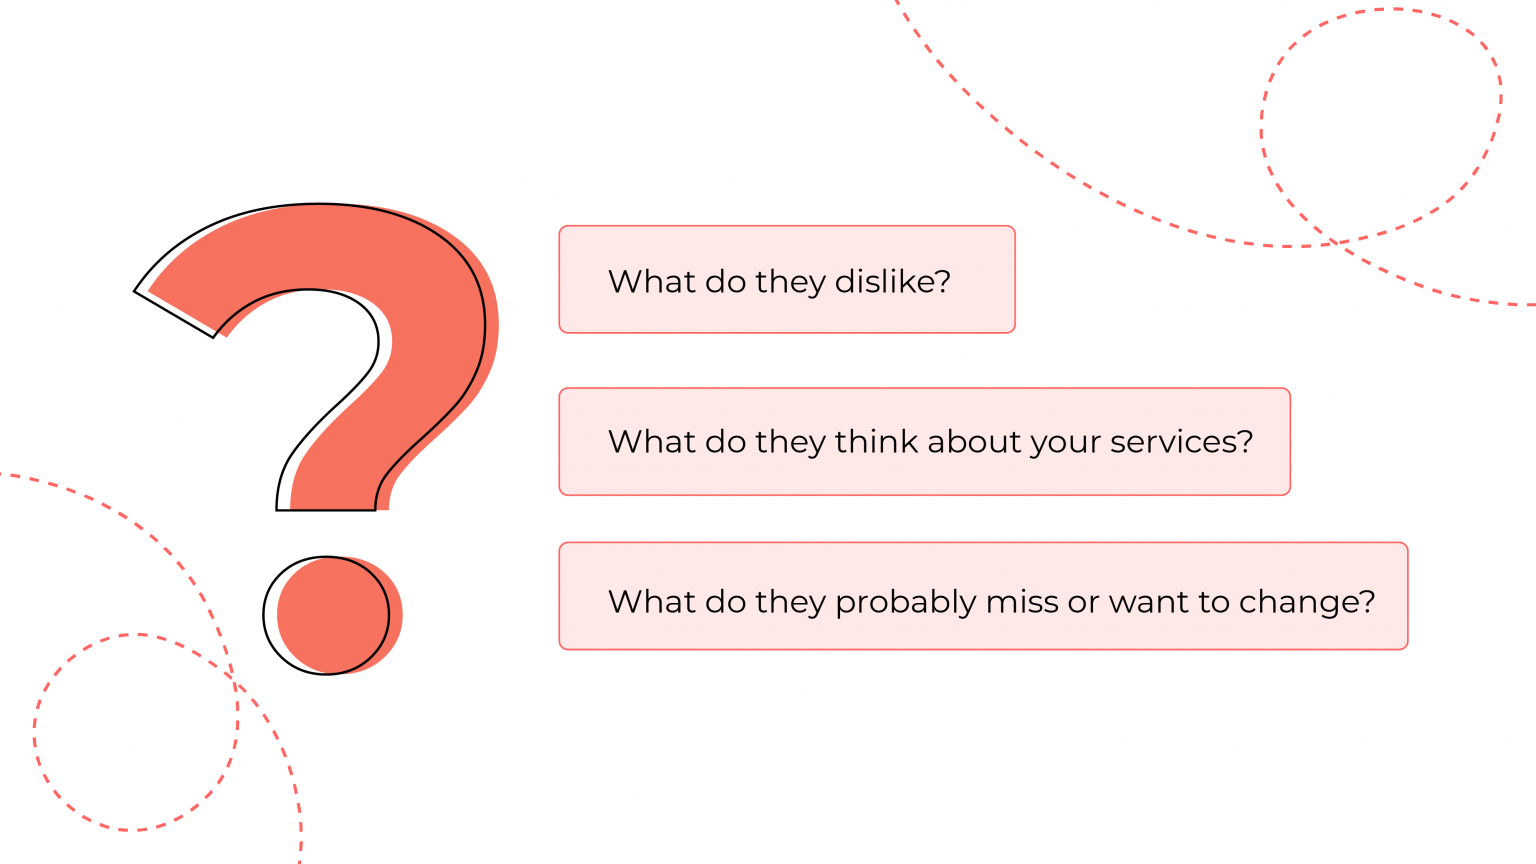 Main questions during user experience research